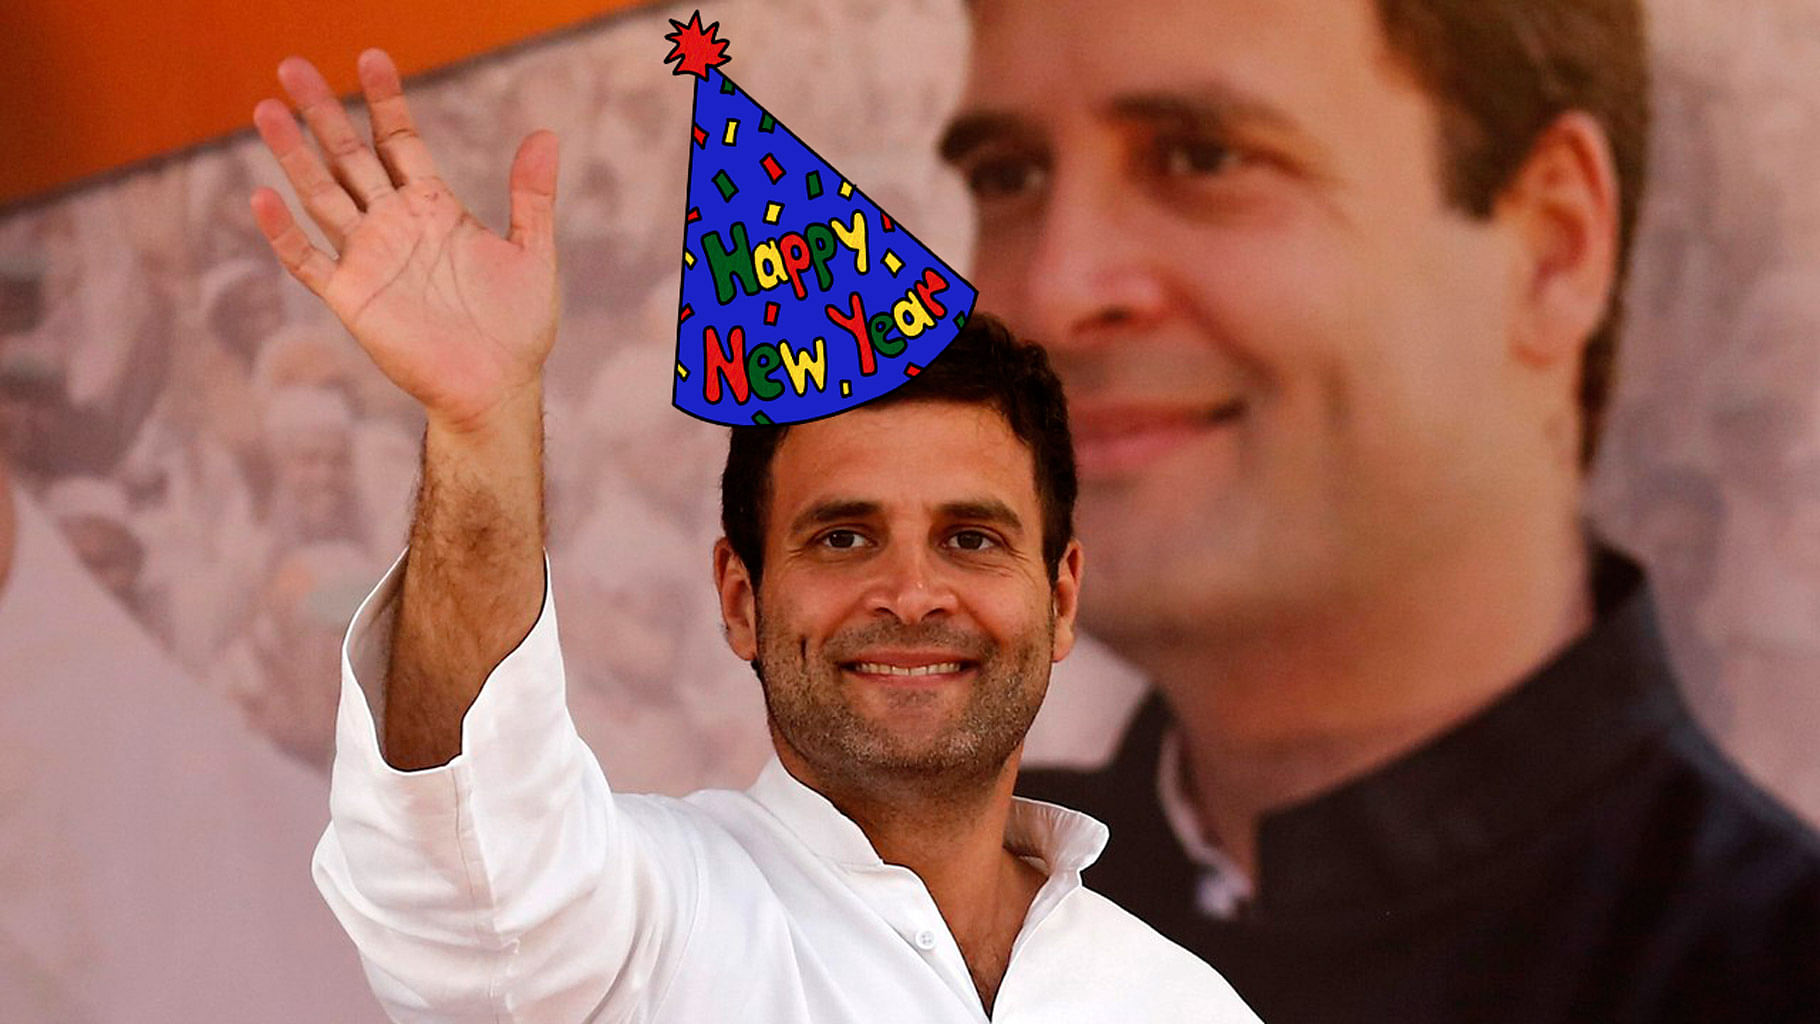 Congress Vice President Rahul Gandhi plans a new year trip. (Photo: Reuters)